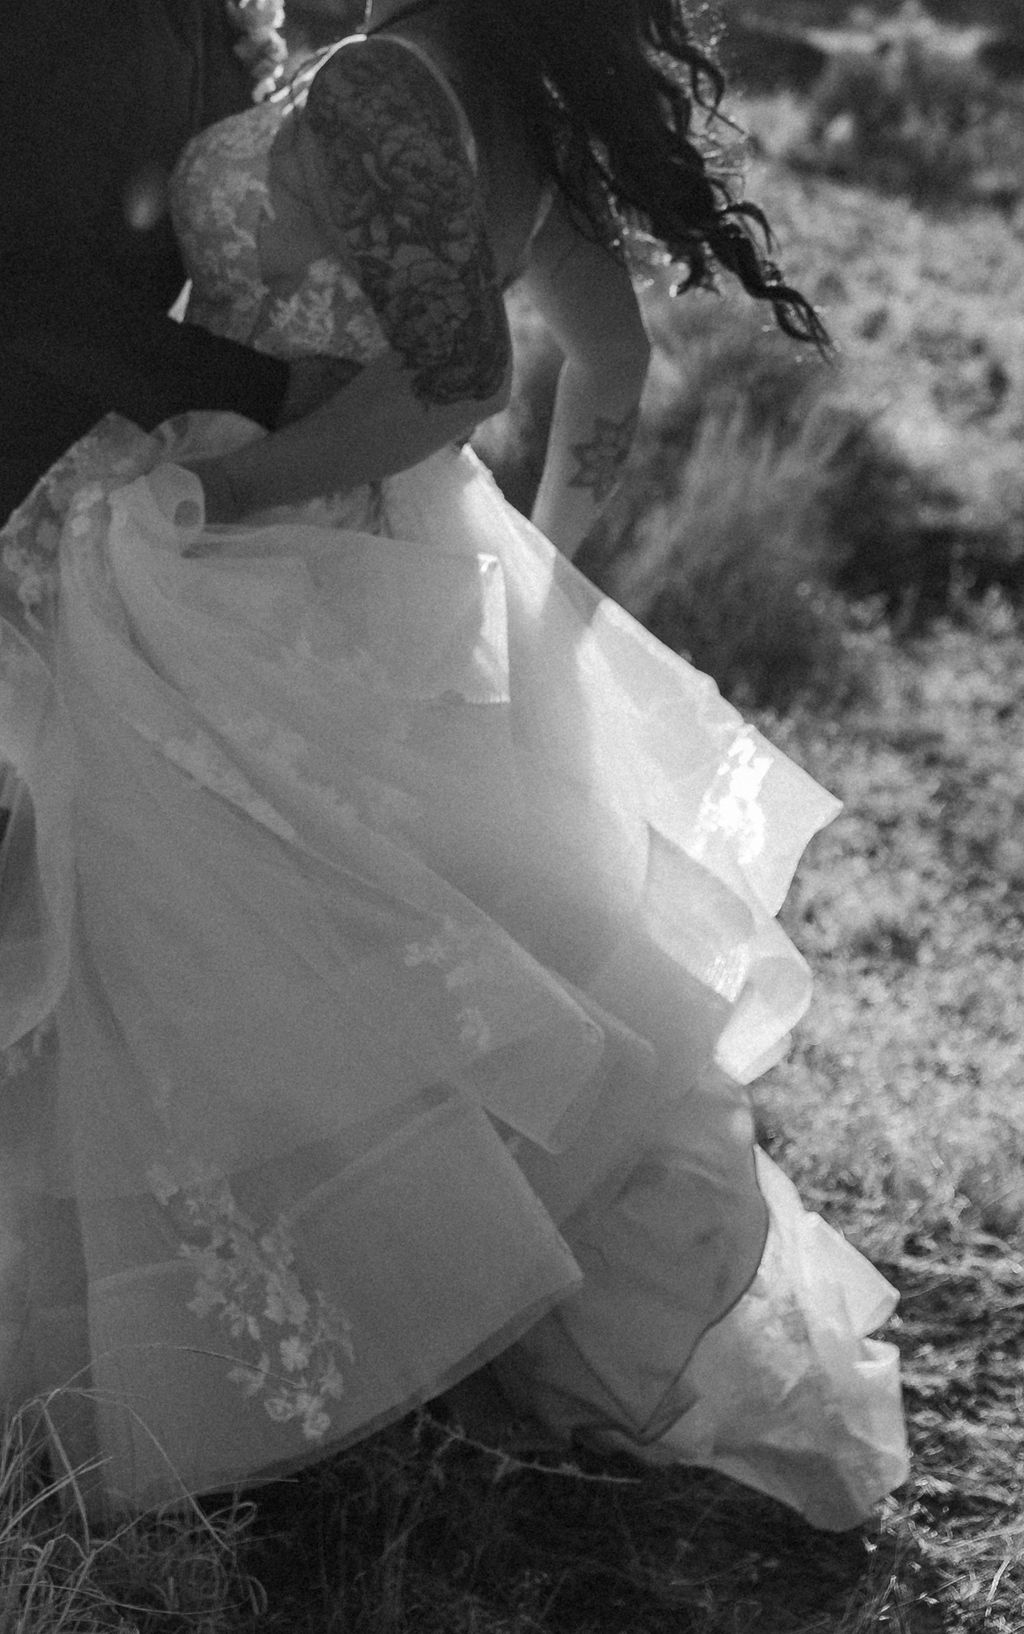 A woman in a lace-sleeved wedding dress walking in sunlight, captured in a black and white photograph at Arches National Park